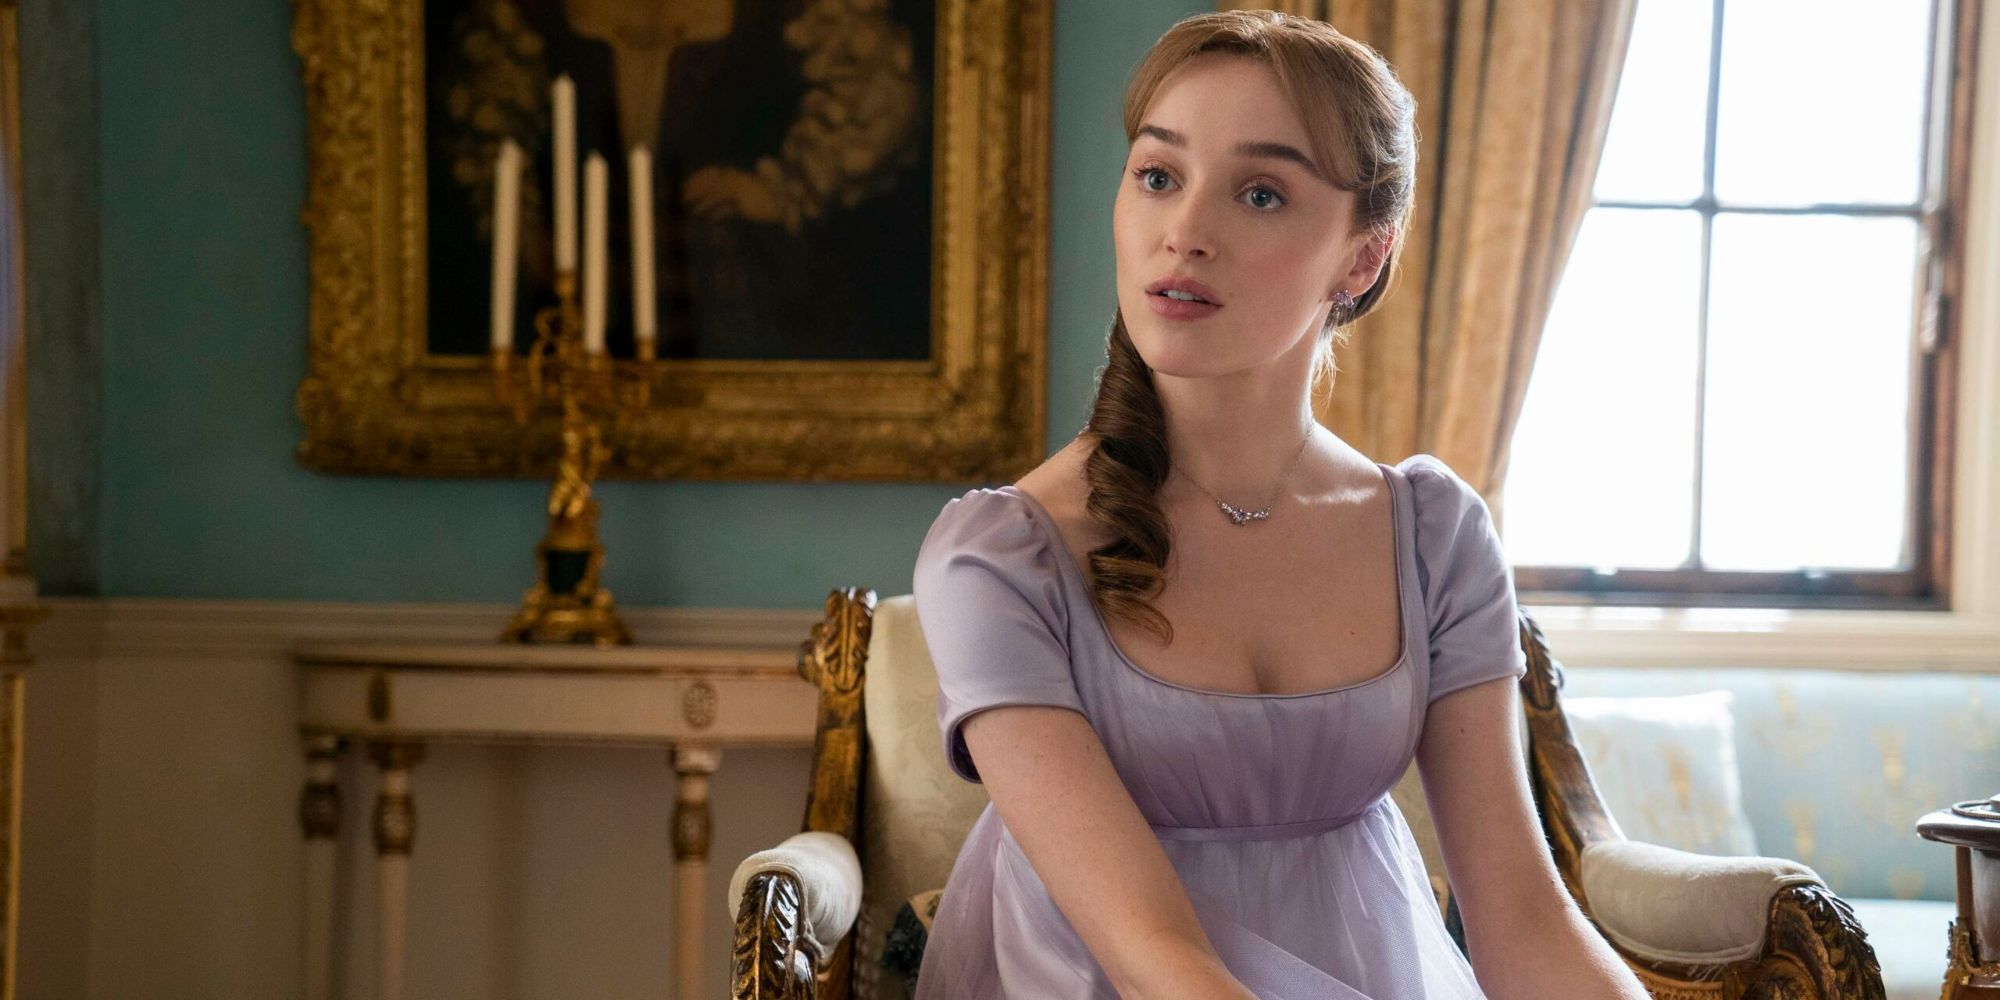 Phoebe Dynevor as Daphne sitting on a chair and looking at someone off-camera in Bridgerton